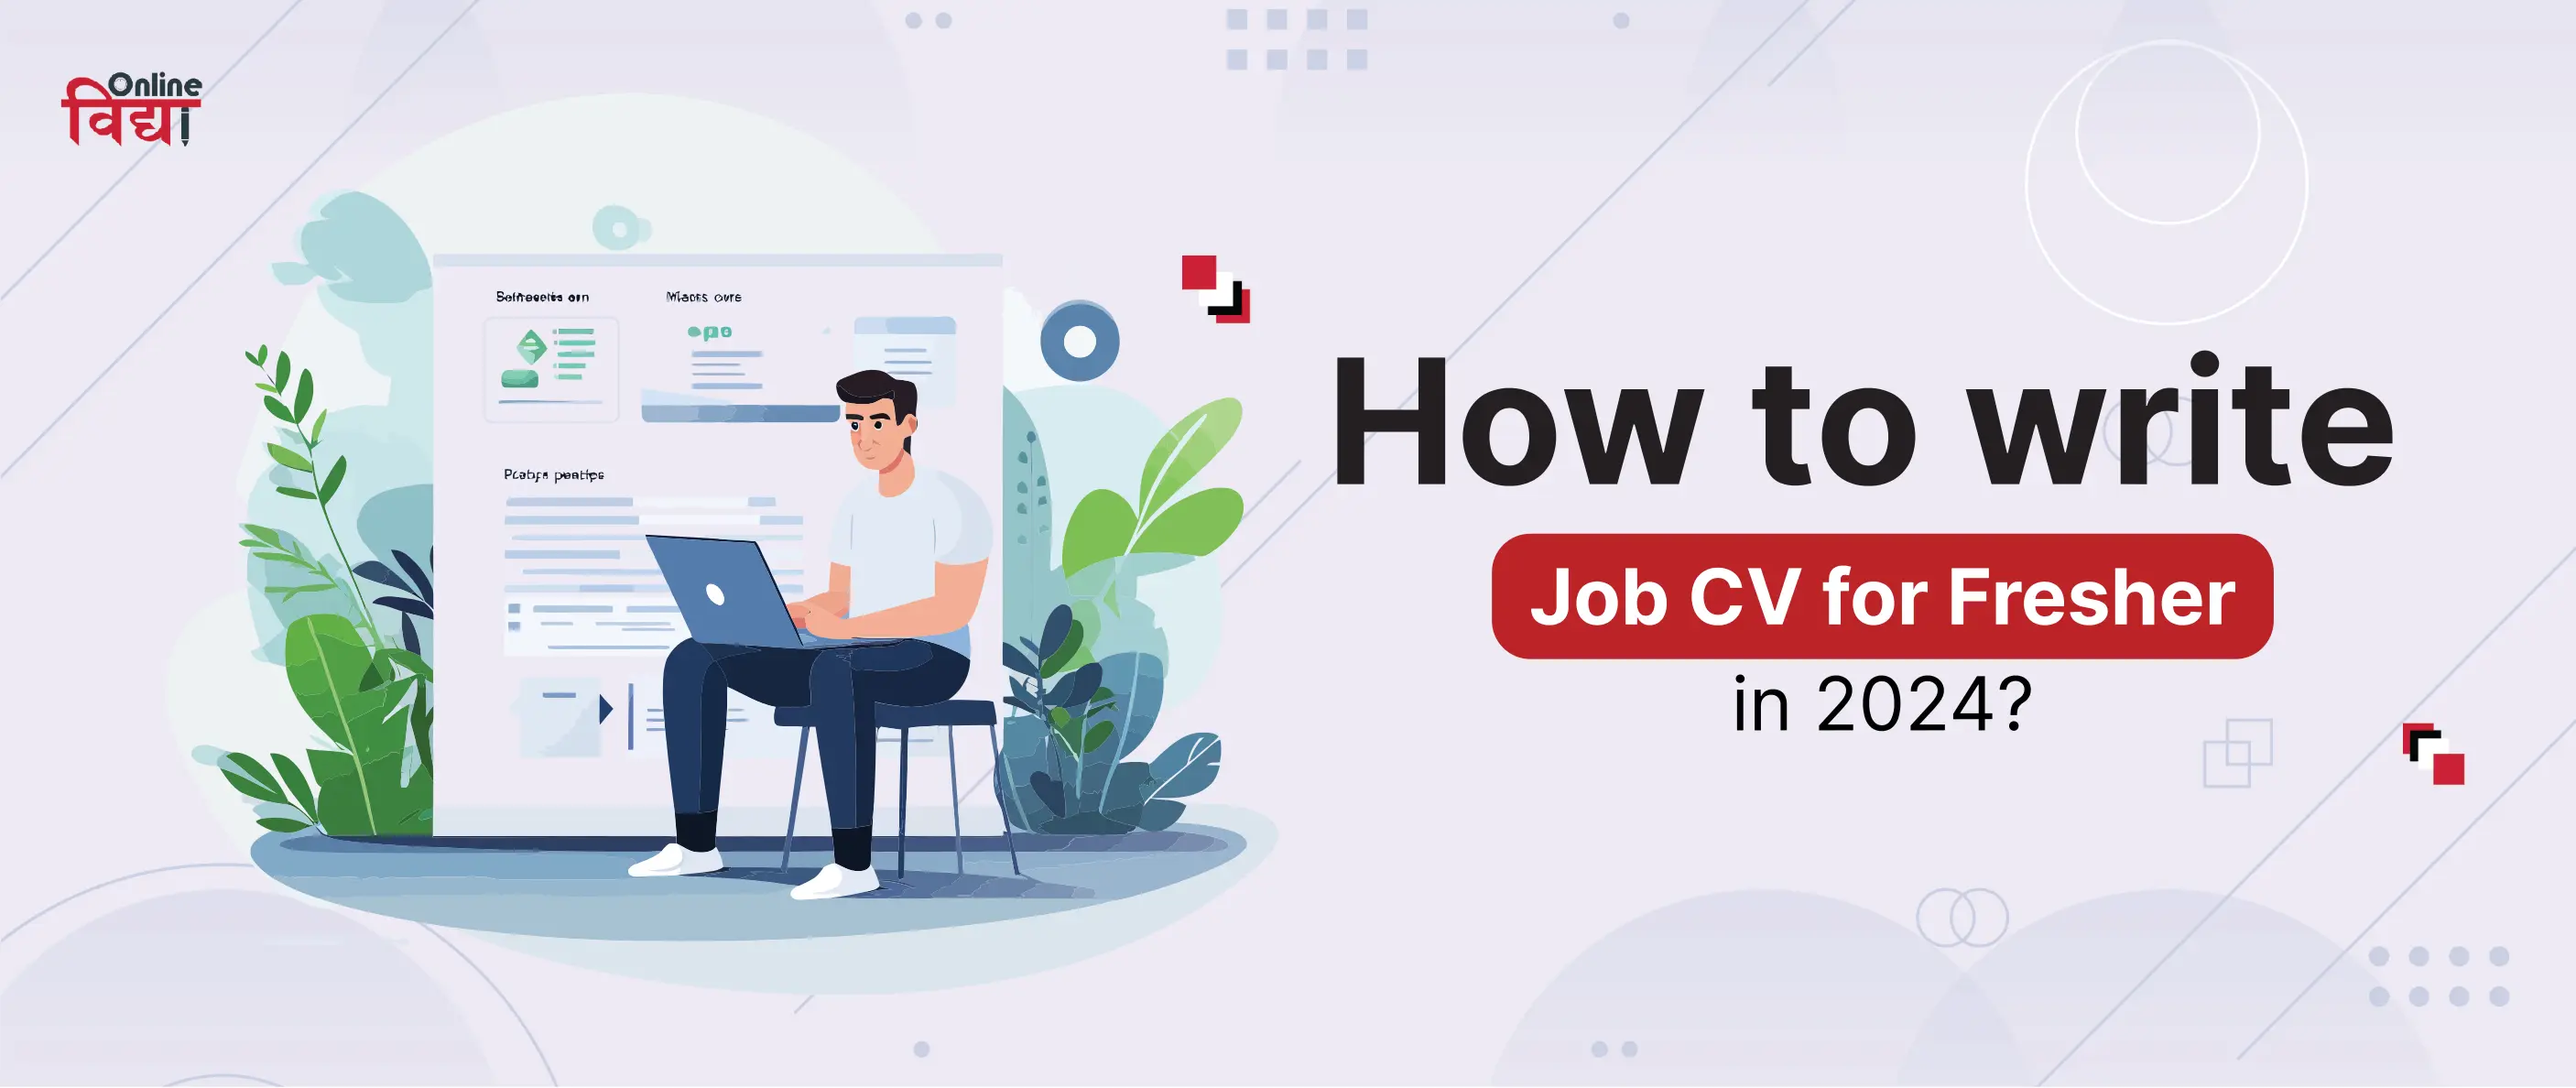 How to write an attractive Job CV for Freshers in 2024?